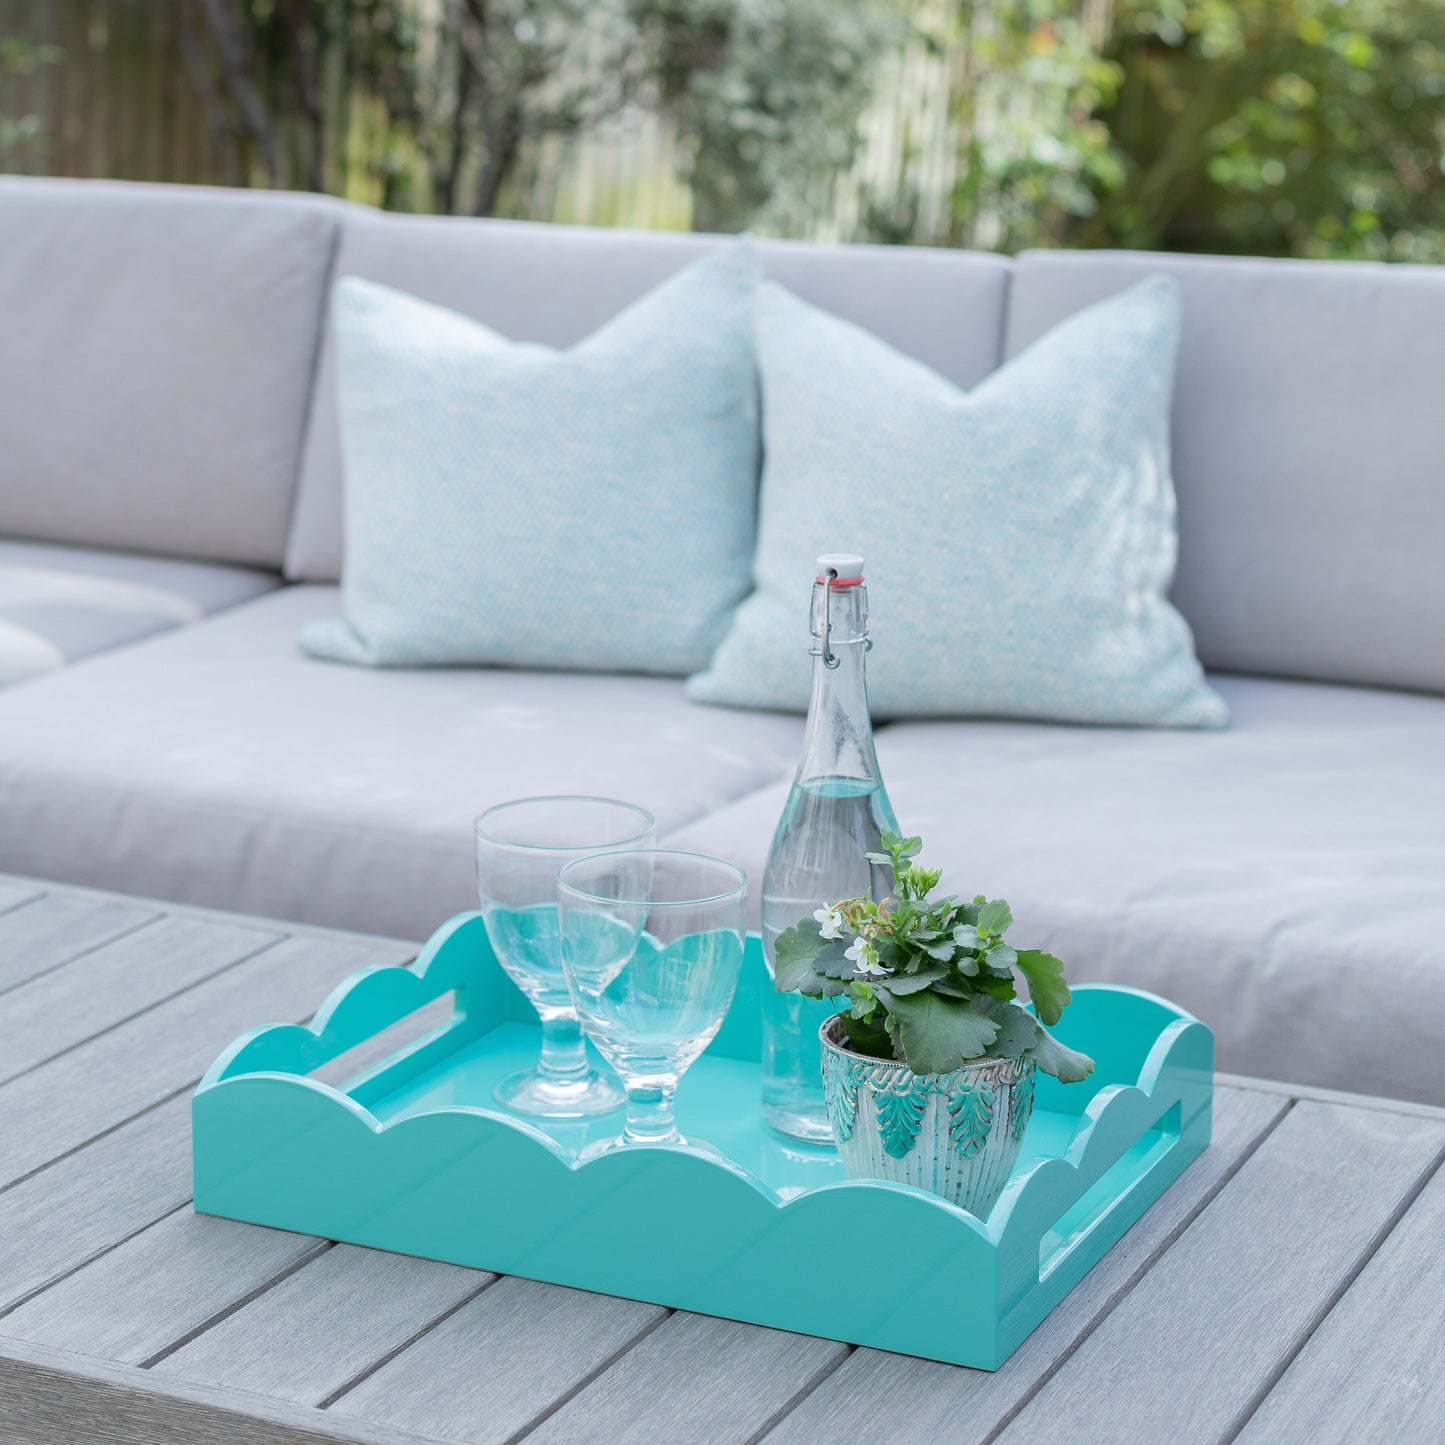 Drinks served on a turquoise blue lacquer tray with a scalloped edge